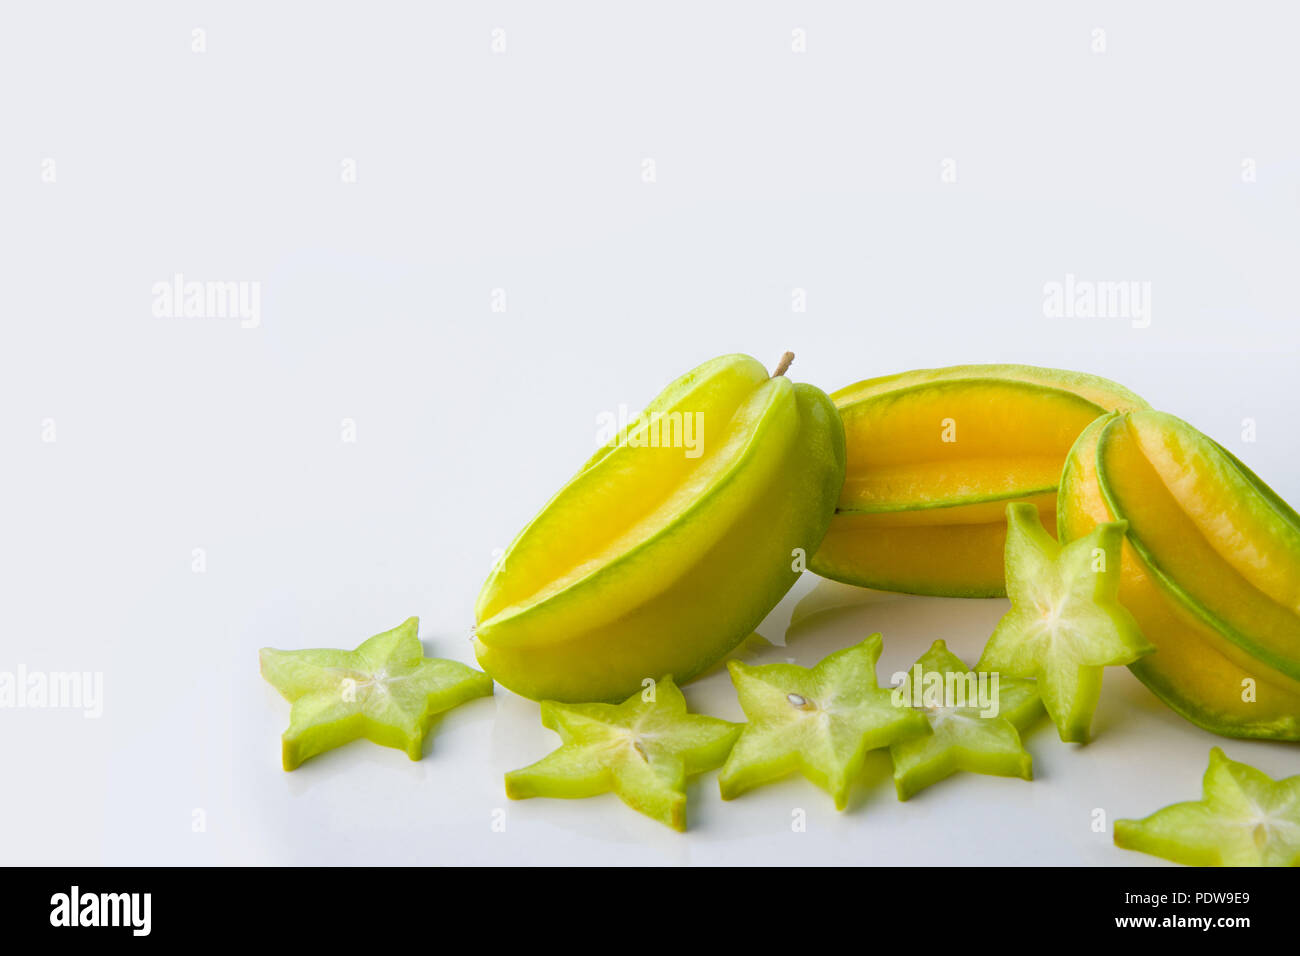 Yellow green star carambola or star apple ( starfruit ) on white background healthy star fruit food isolated Stock Photo